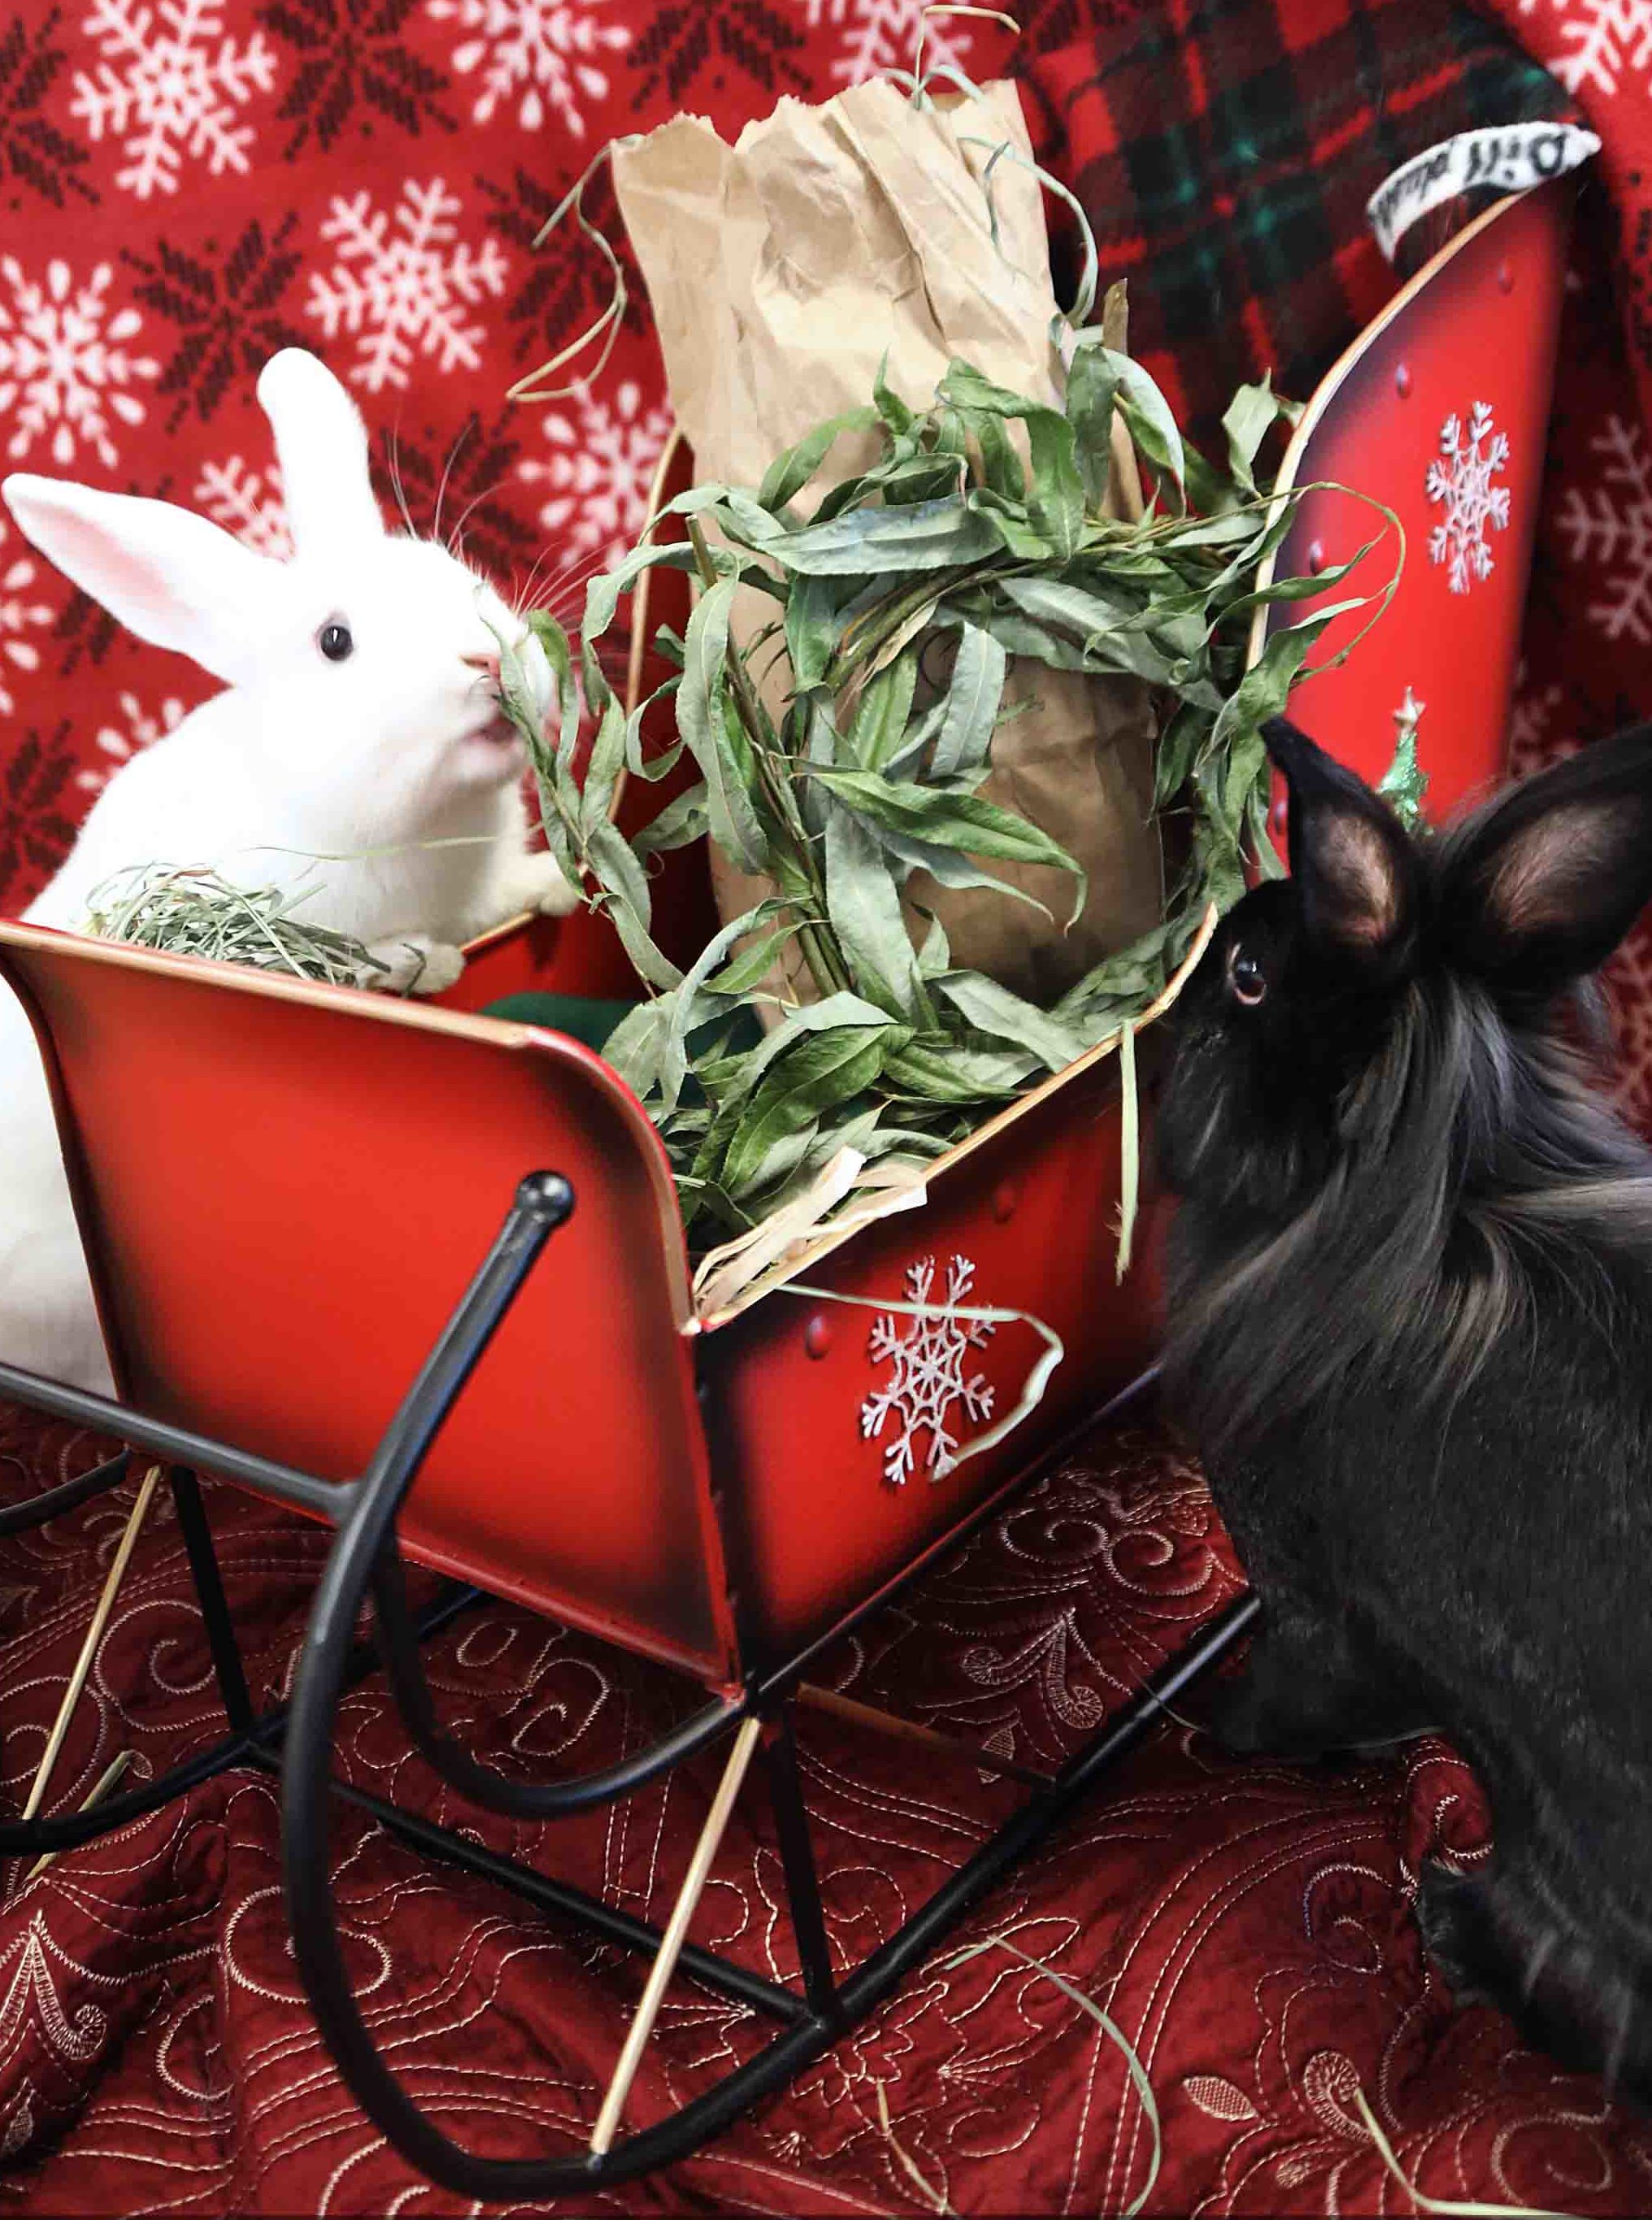 Coke and Roko at the Peninsula Humane Society eagerly check out Santa Bun's sleigh filled with gift bags and willow wreaths.